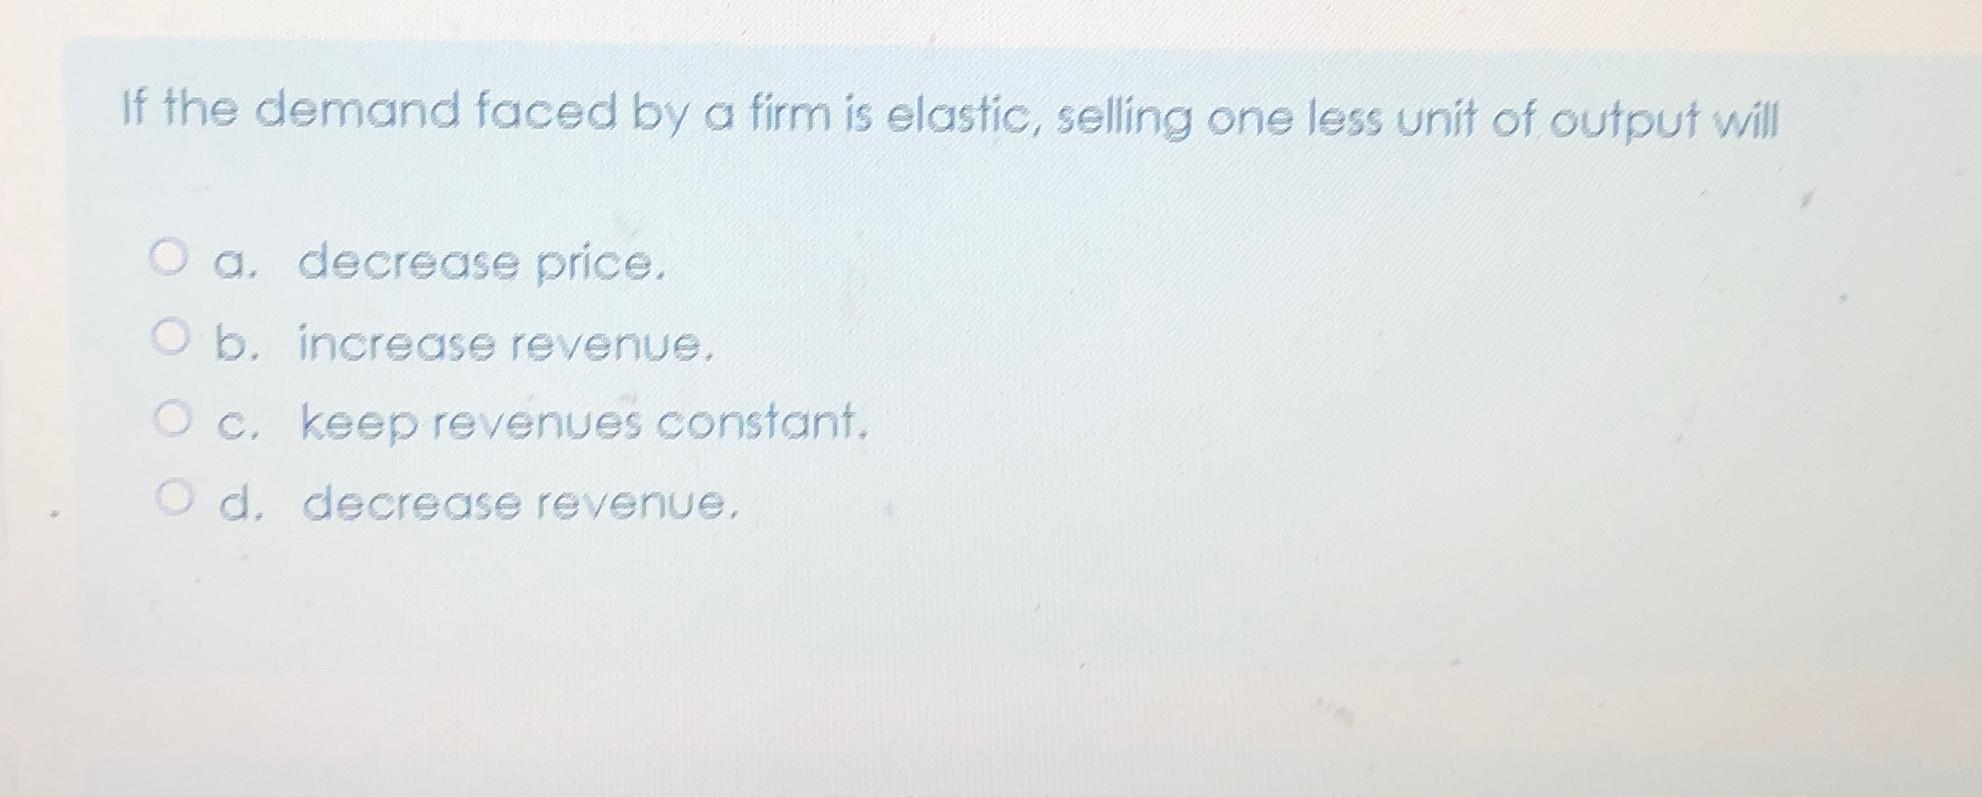 If the demand faced by a firm is elastic, selling one less unit of output will O a. decrease price. O b.